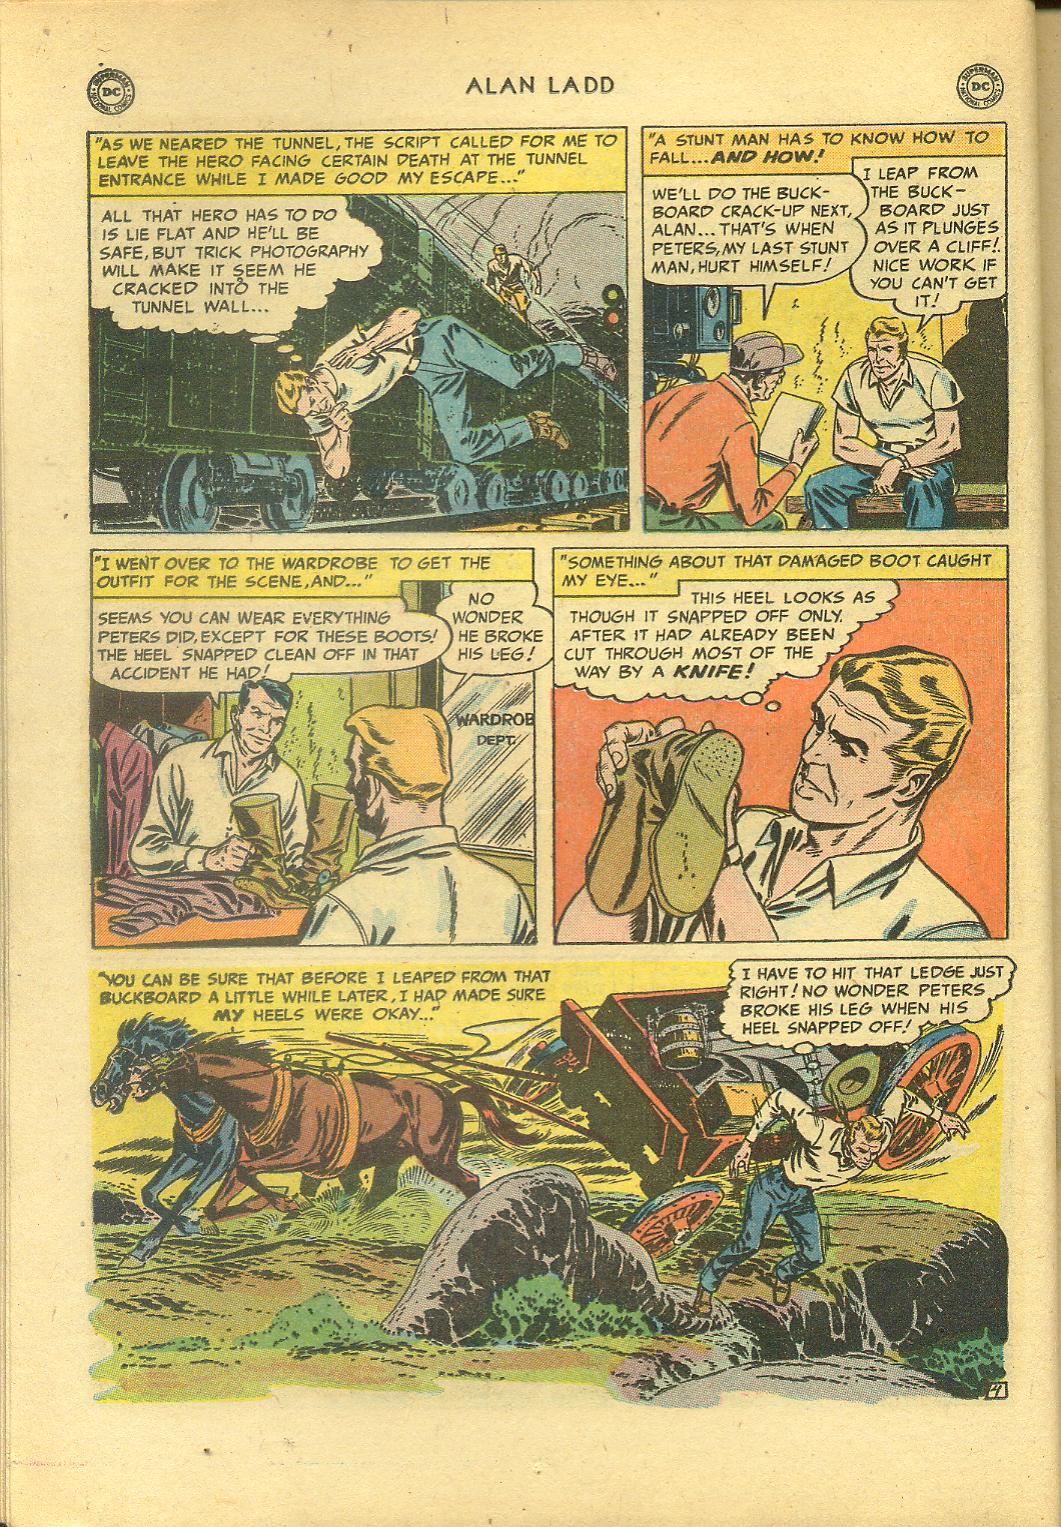 Read online Adventures of Alan Ladd comic -  Issue #3 - 18